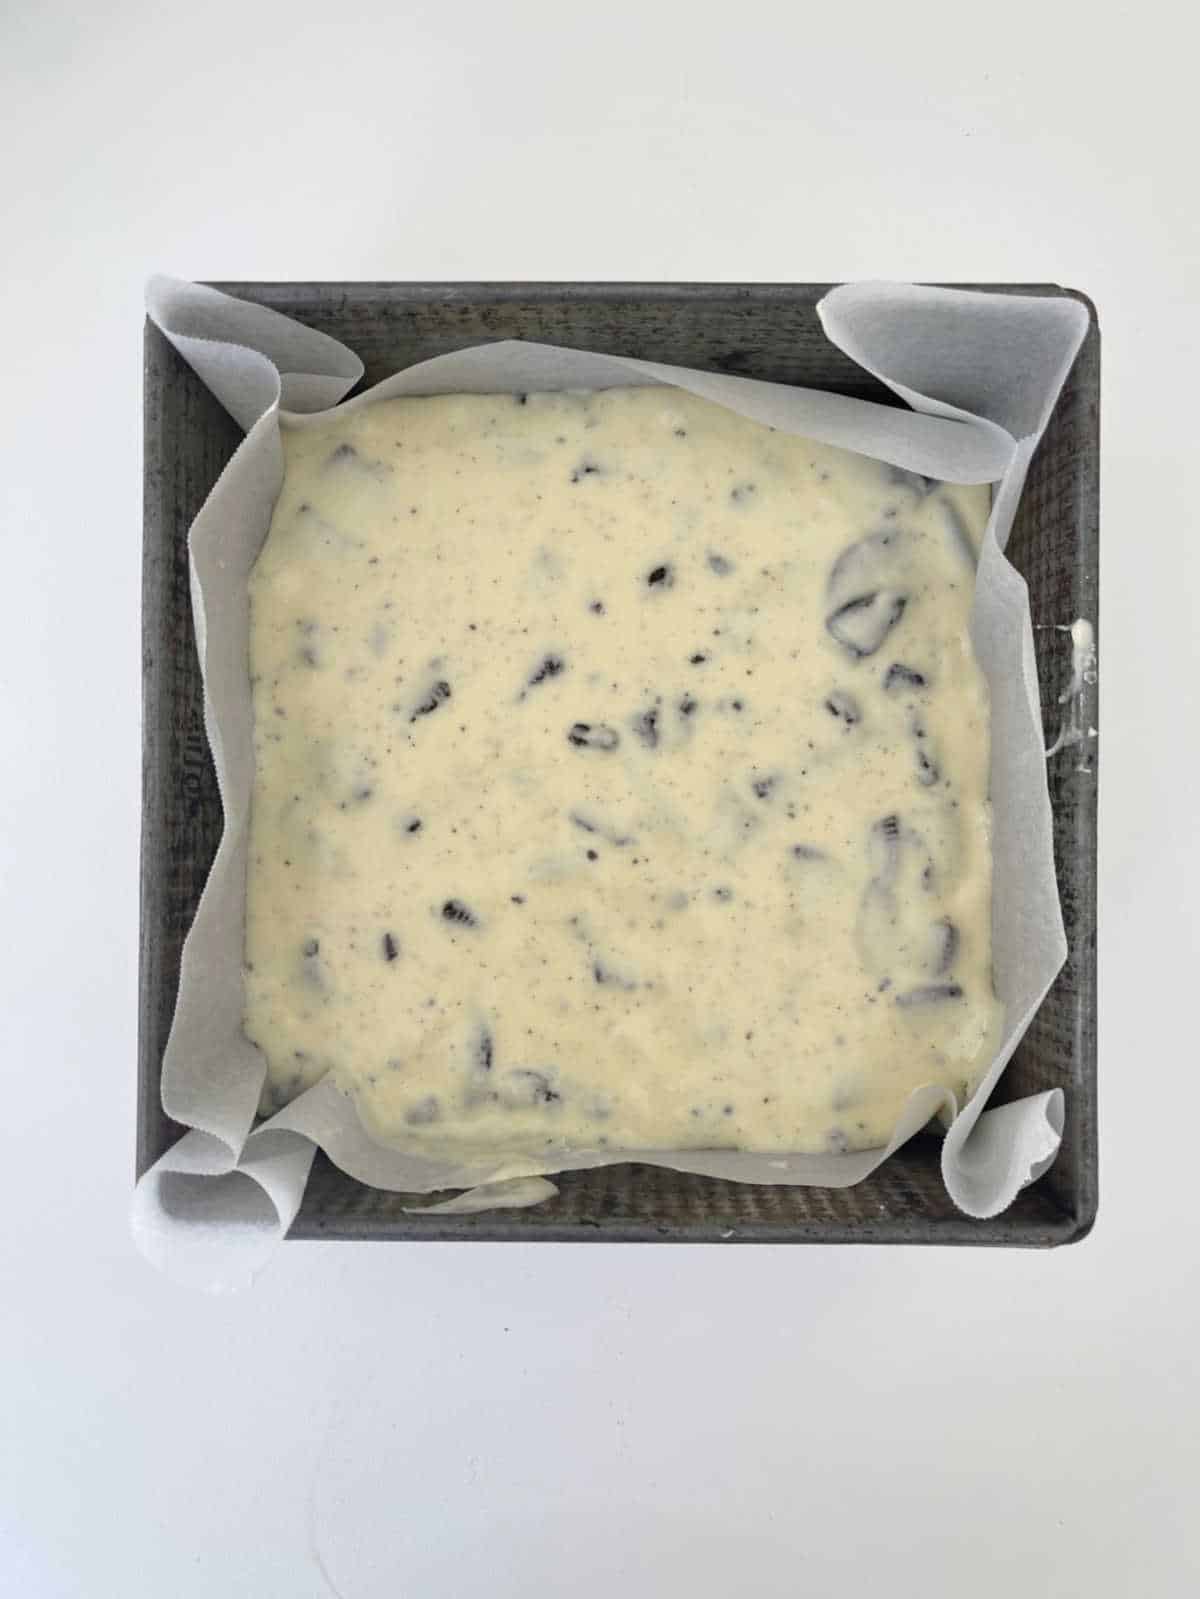 white chocolate and Oreo fudge mixture in a baking dish.